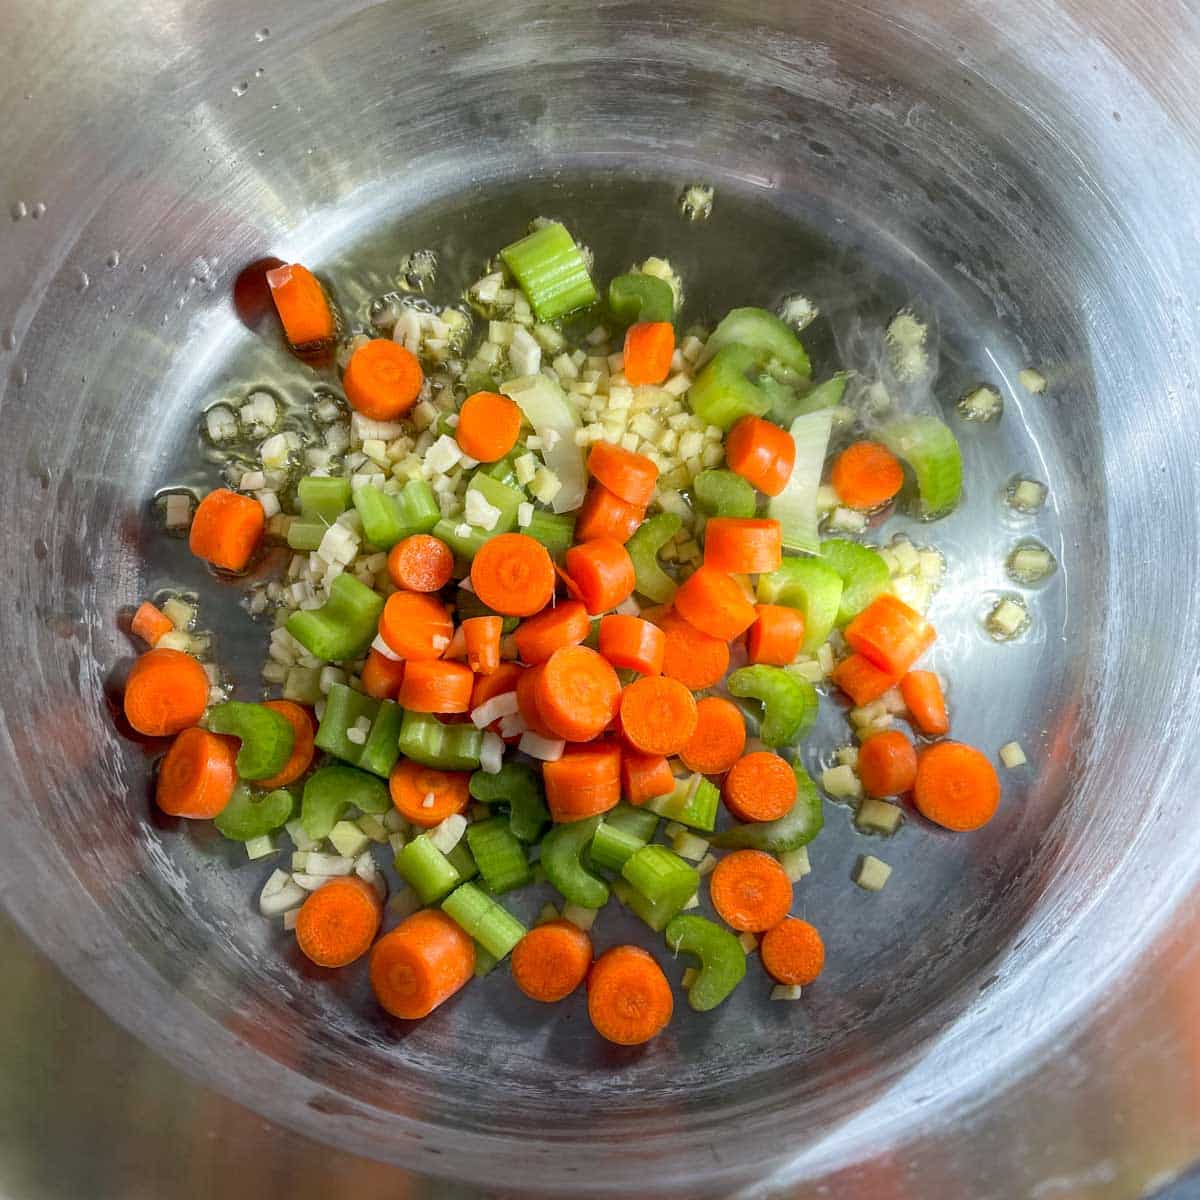 Ginger, garlic, celery, and carrot sweat in a pot.